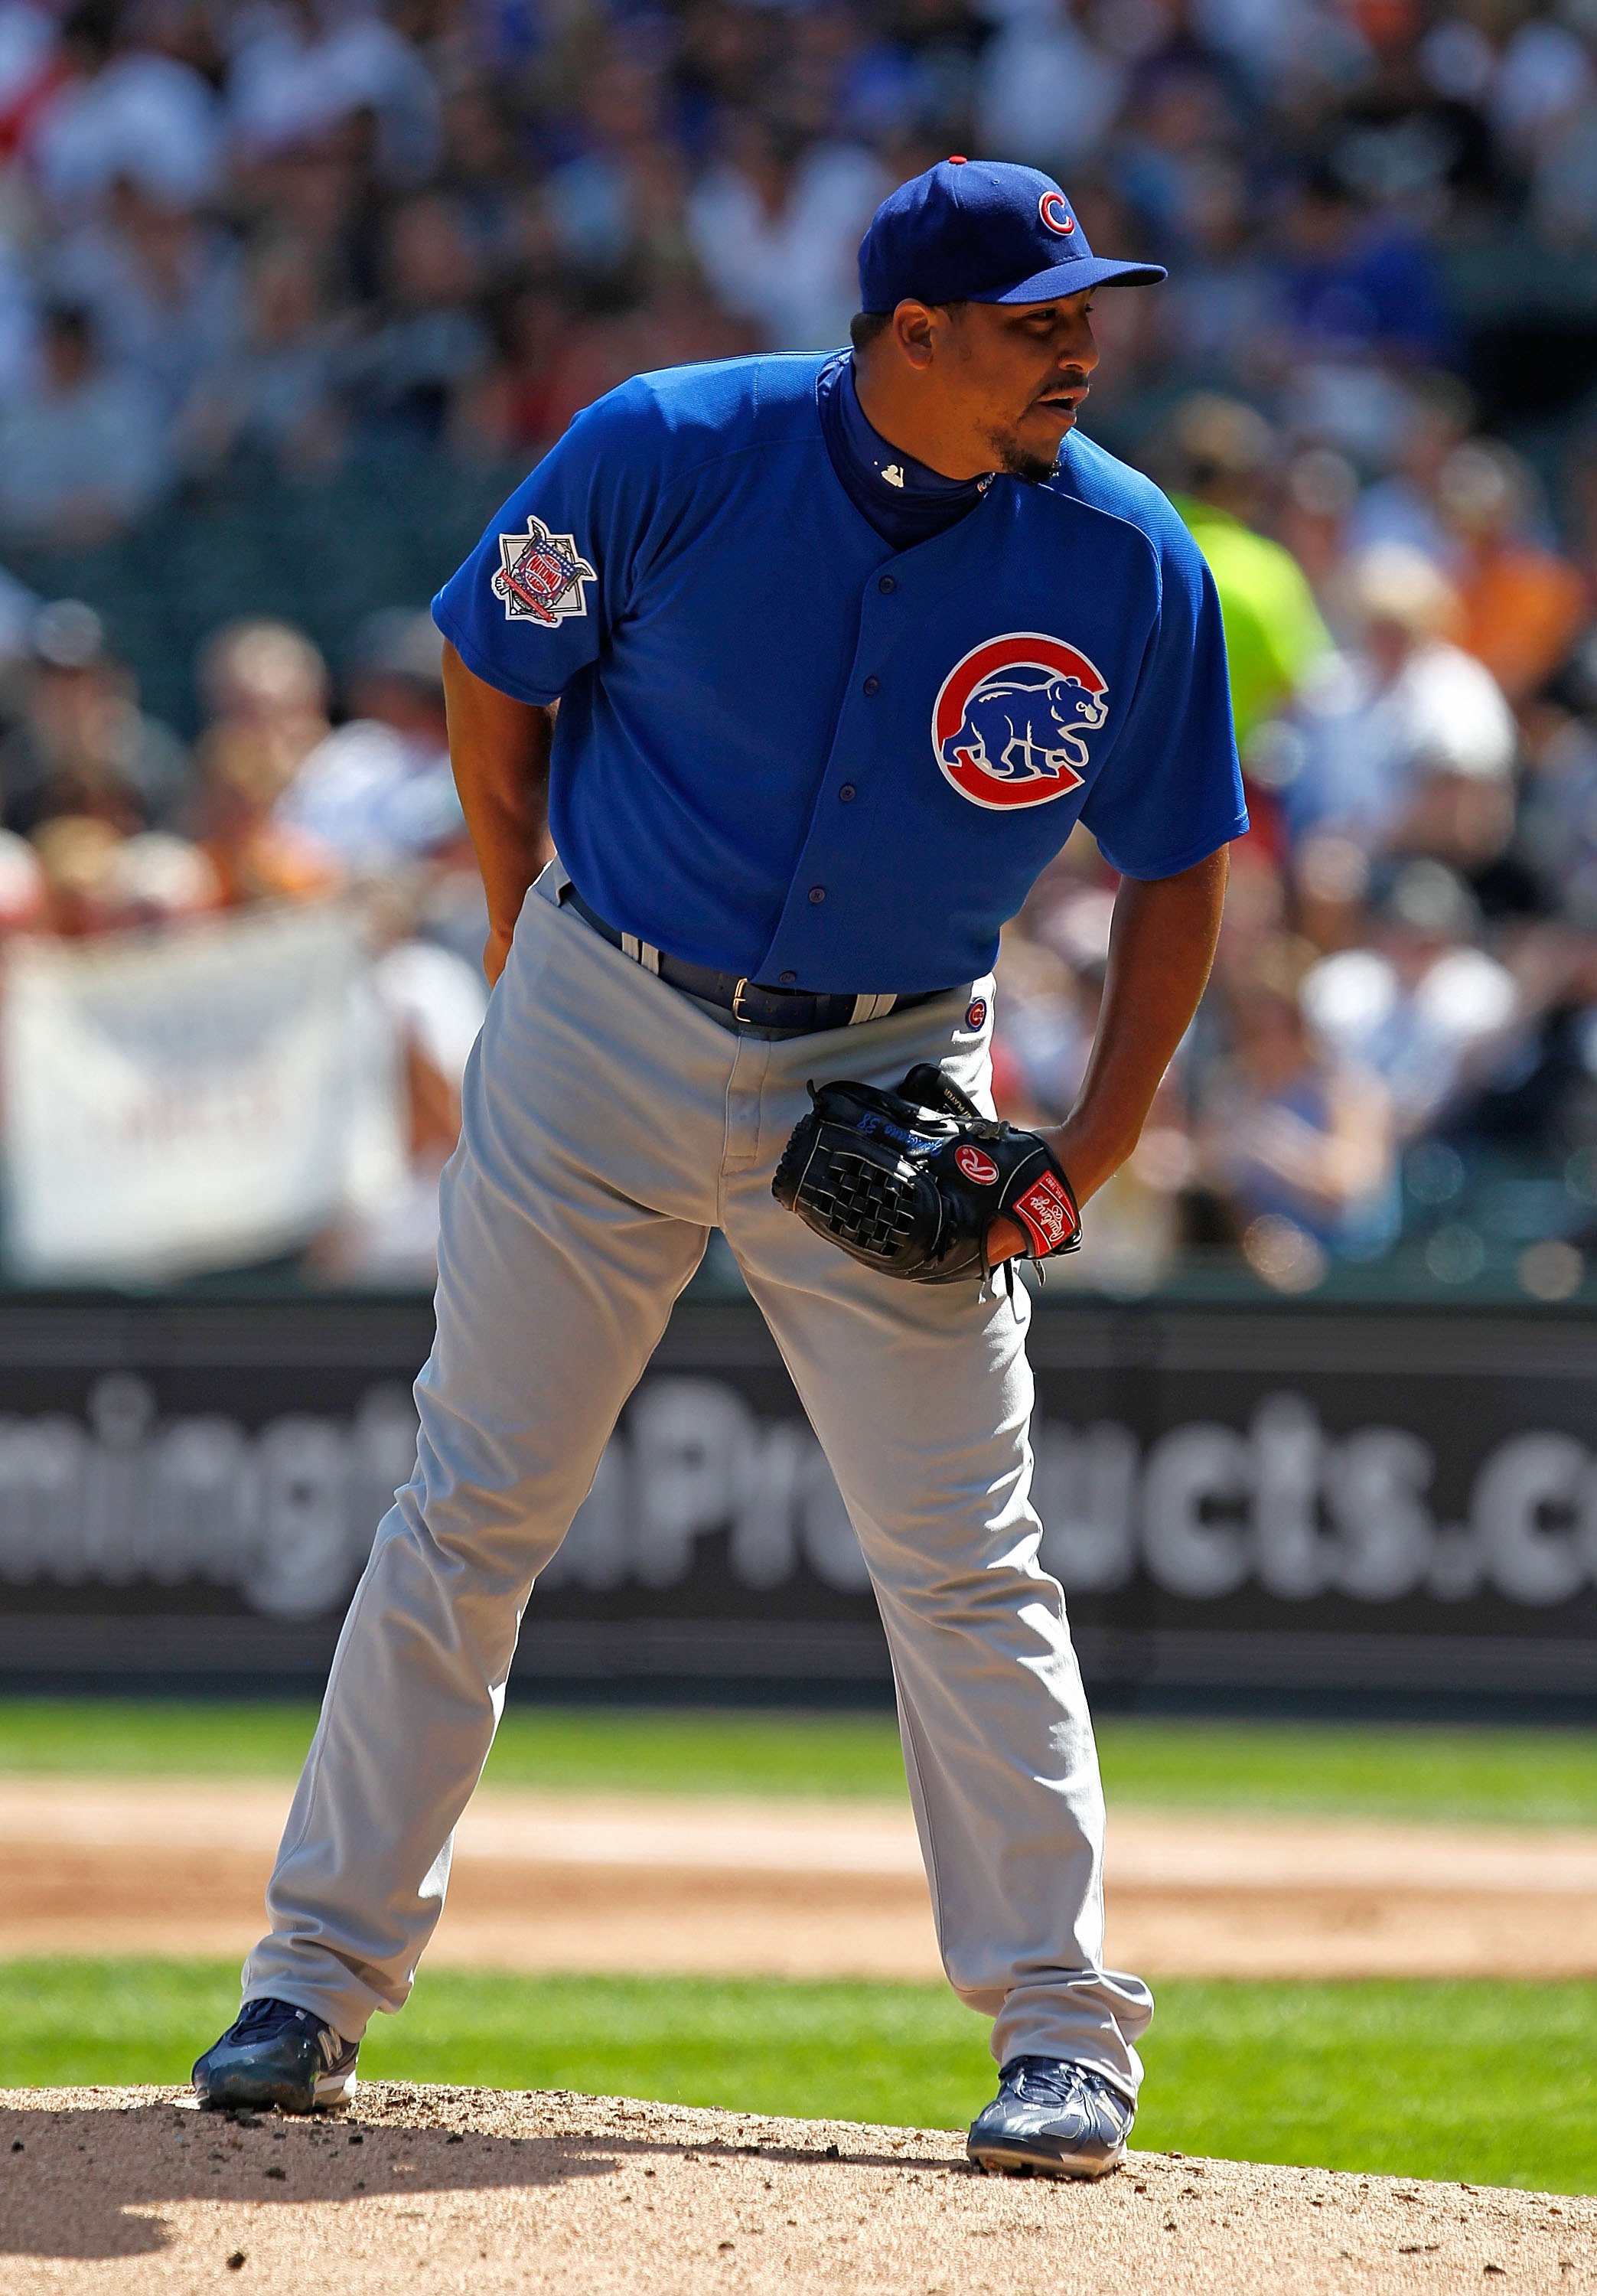 CHICAGO - JUNE 25: Starting pitcher Carlos Zambrano #38 of the Chicago Cubs looks for the catcher's signs in the 1st inning against the Chicago White Sox at U.S. Cellular Field on June 25, 2010 in Chicago, Illinois. Zambrano was suspended indefinitely by